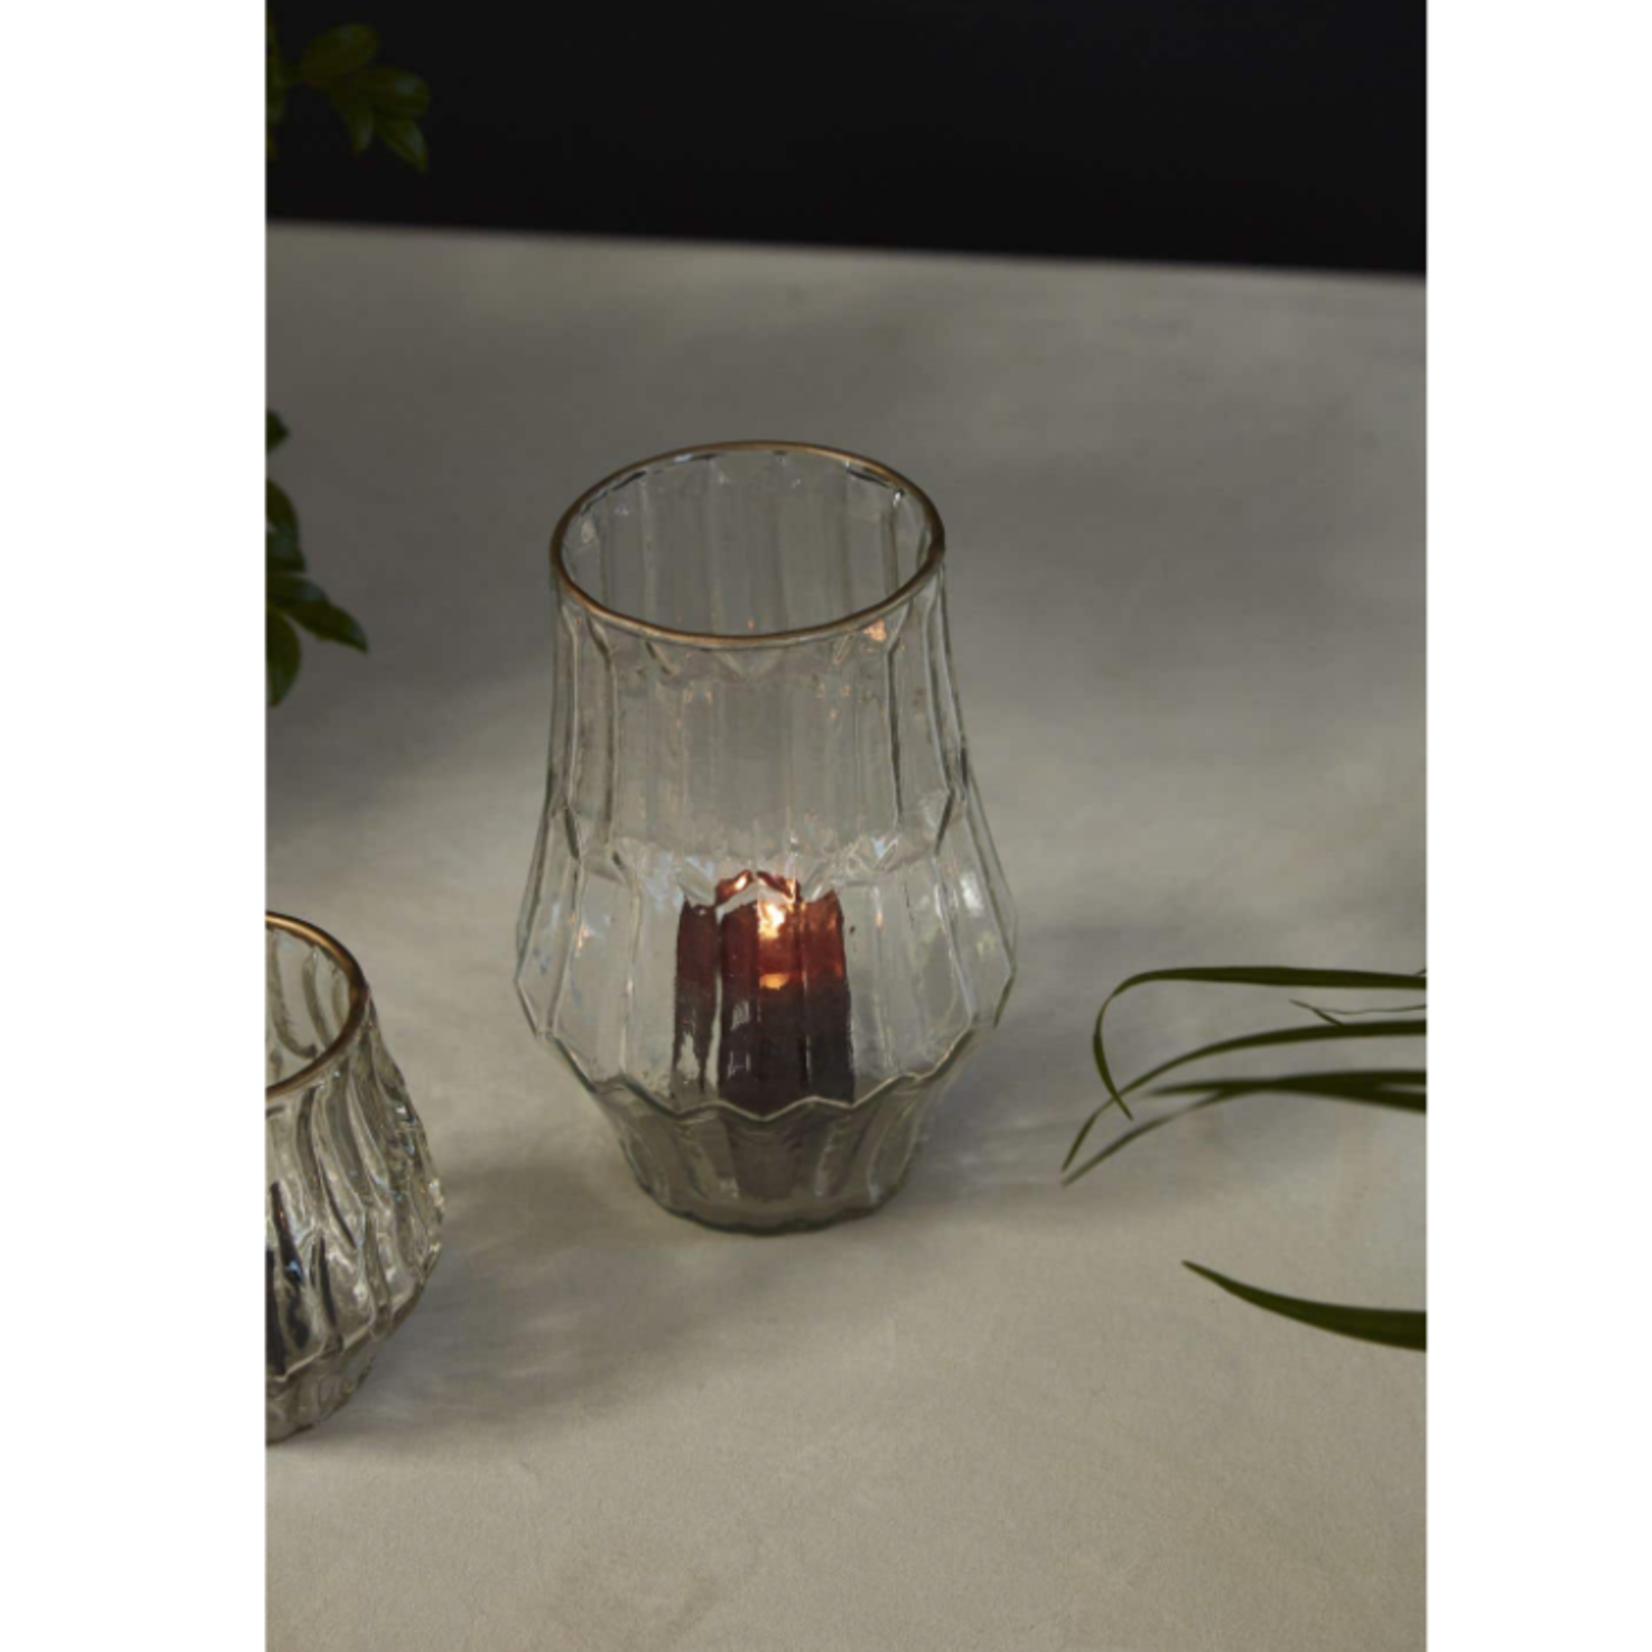 6.75”H X 4.5” CLEAR GLASS KATHERINE VOTIVE WITH GOLD LIP